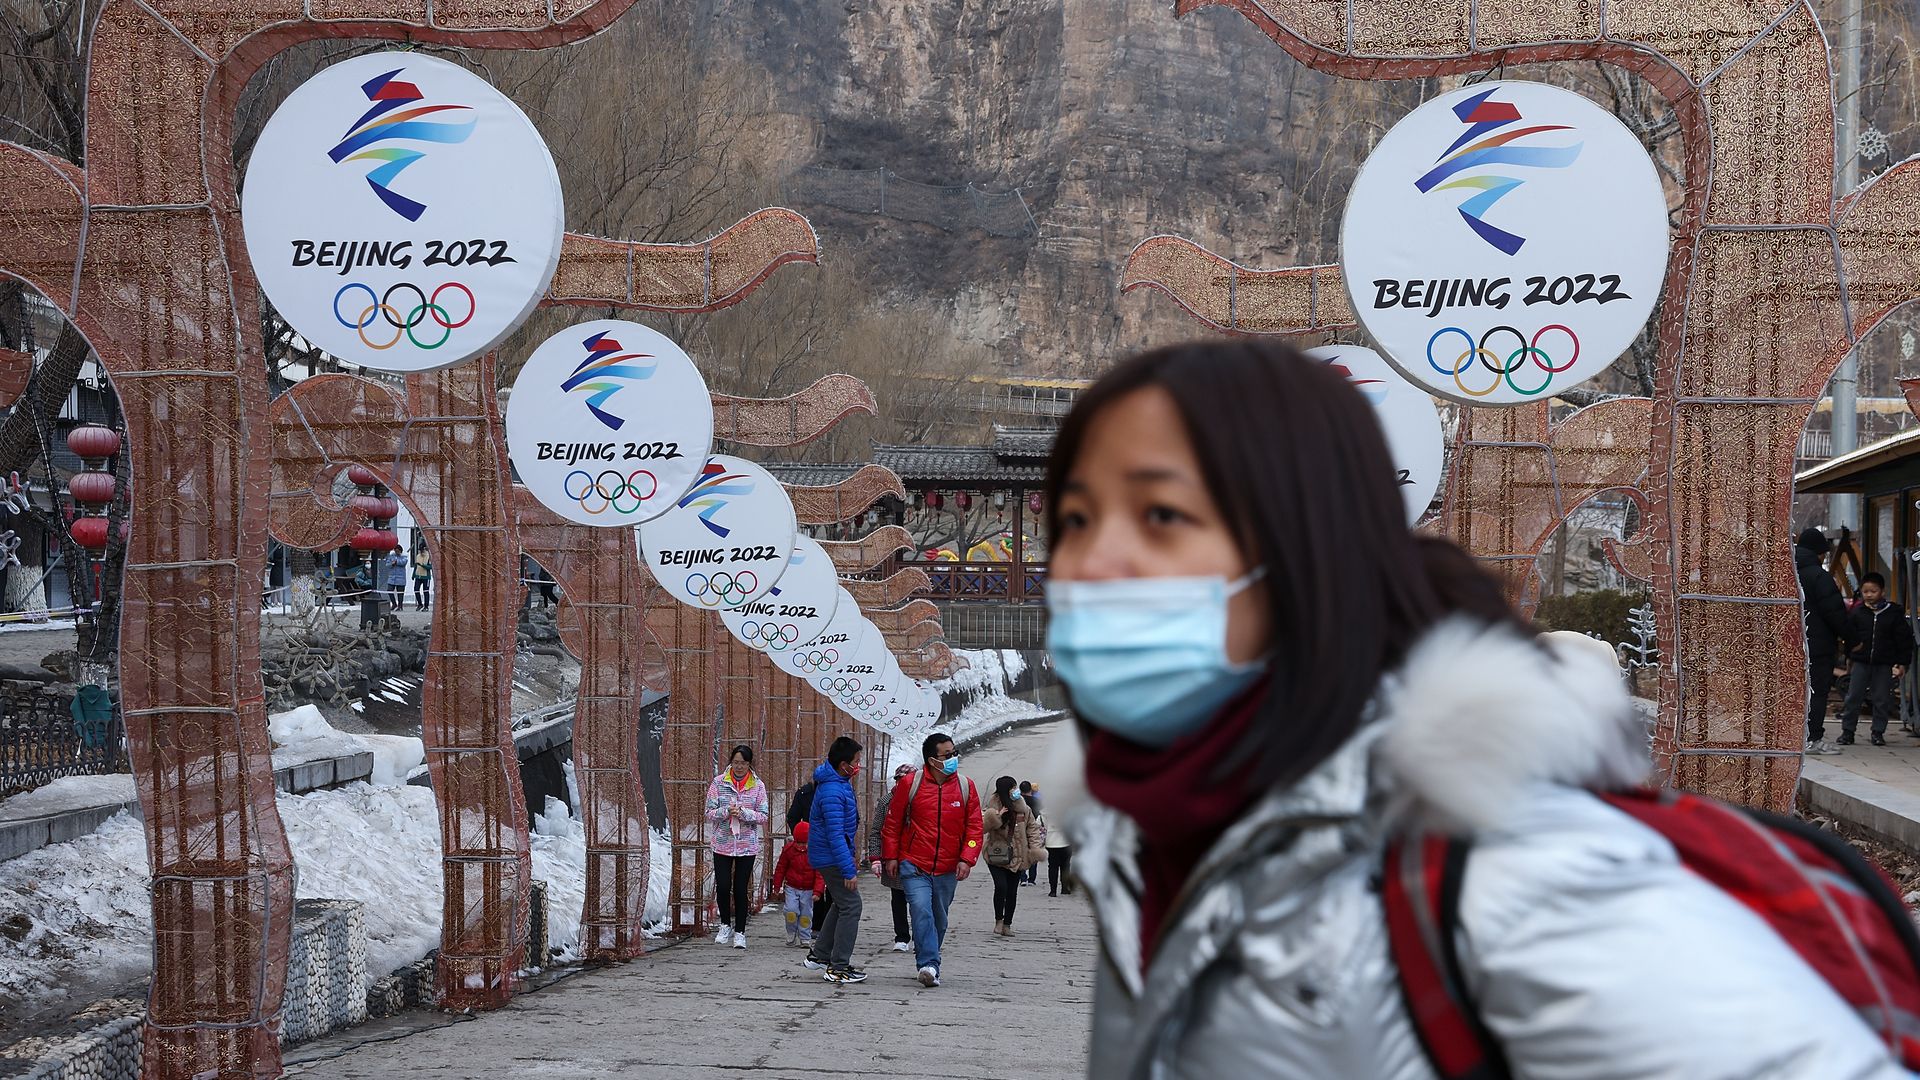 Logos for the 2022 Winter Olympics at Yanqing Ice Festival in February 2021 in Beijing.